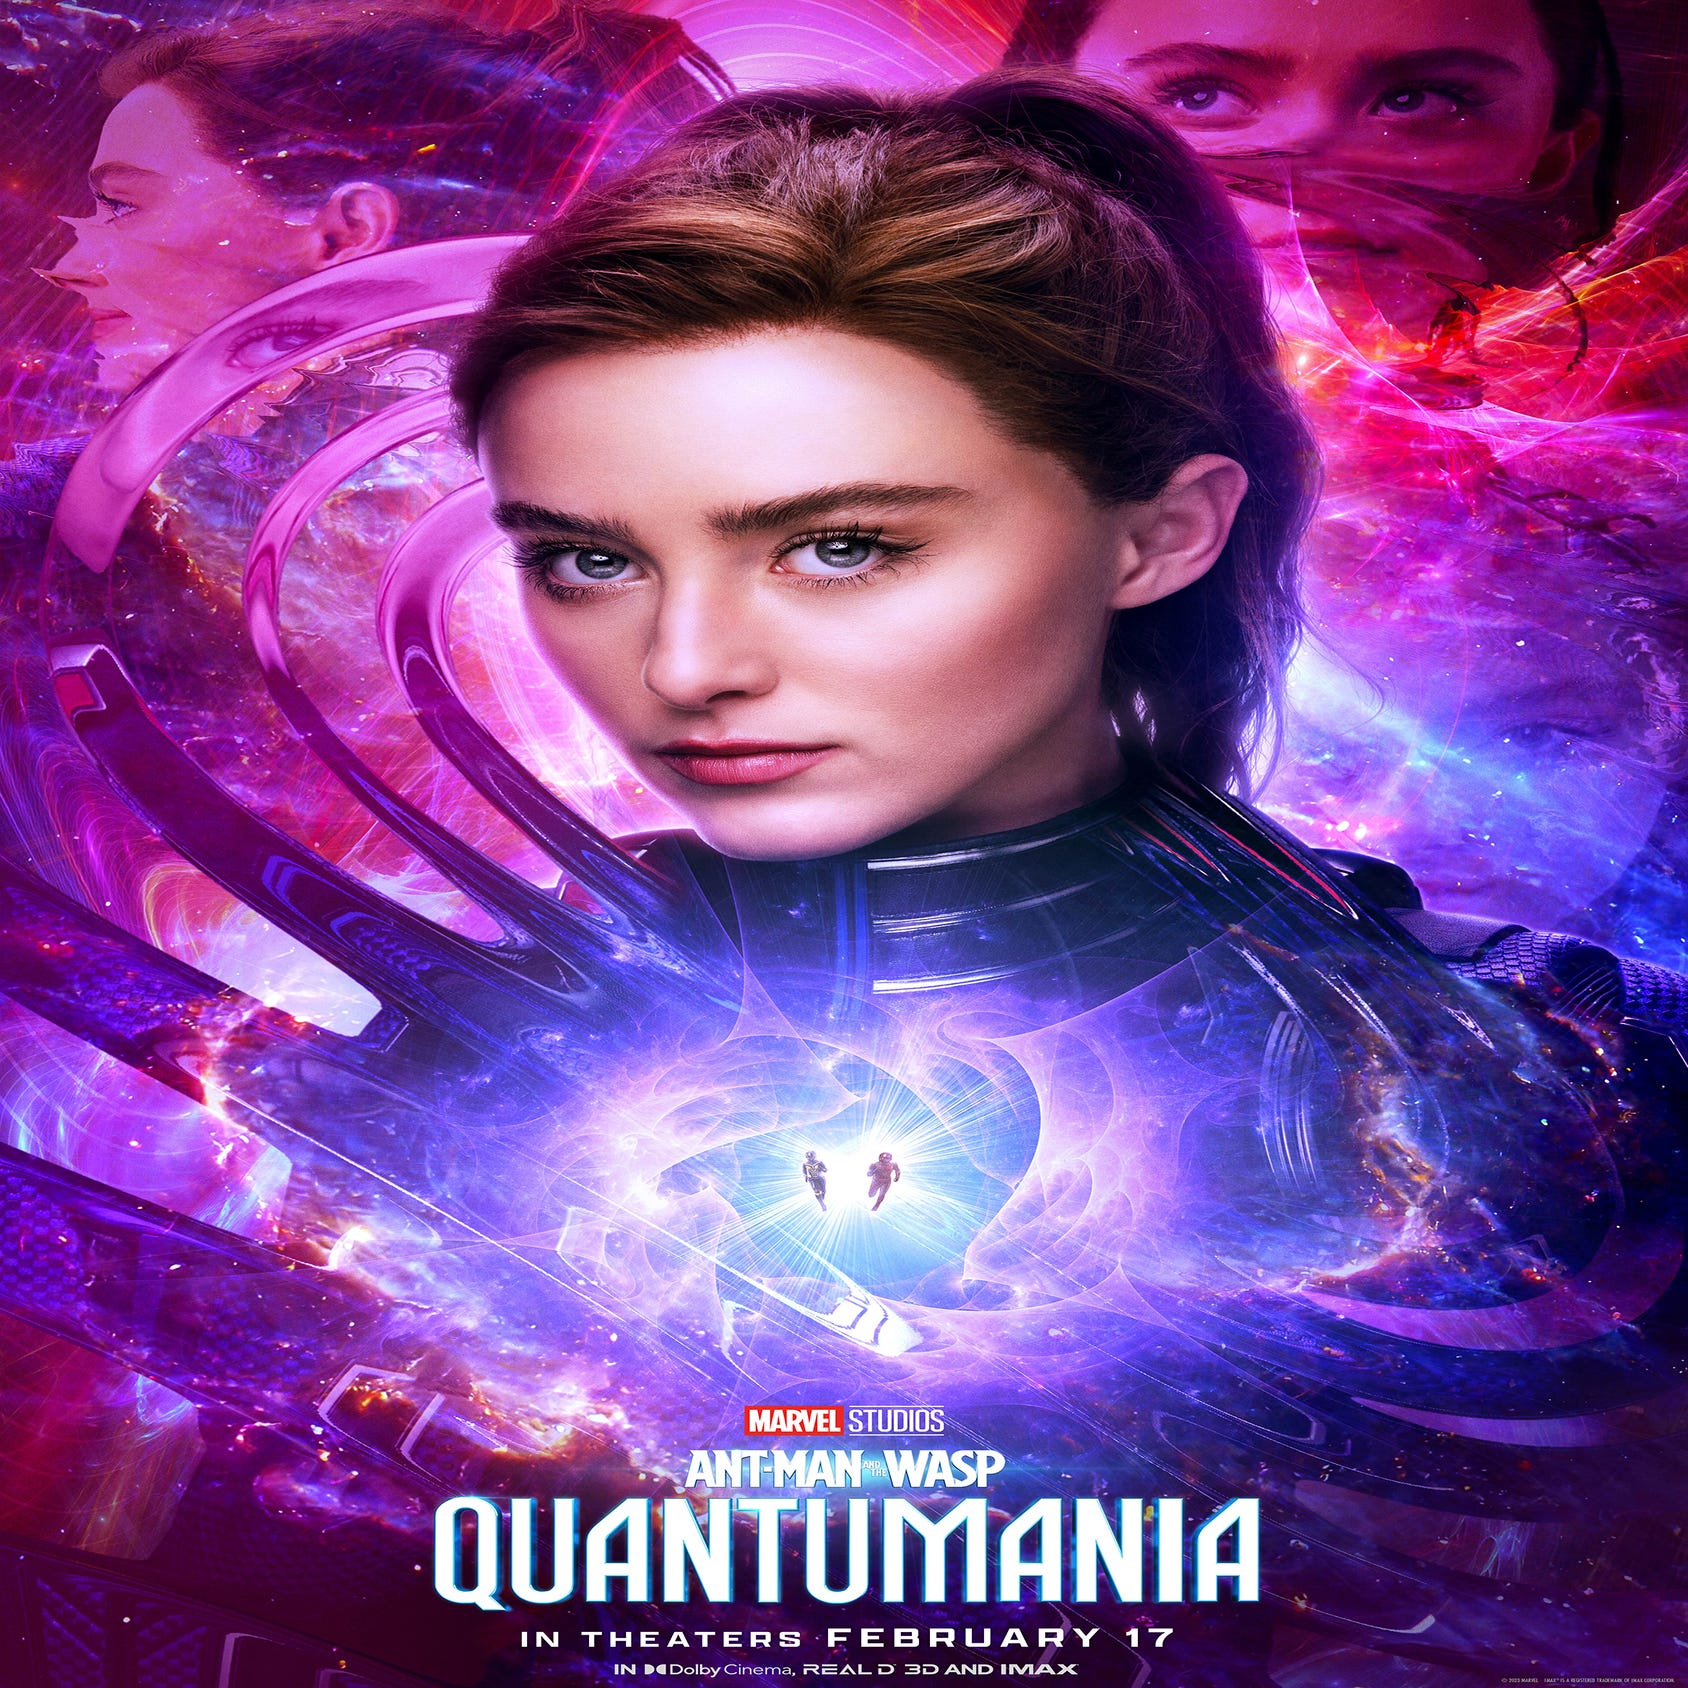 Ant-Man and The Wasp: Quantumania' Release Date, Plot, Cast, and